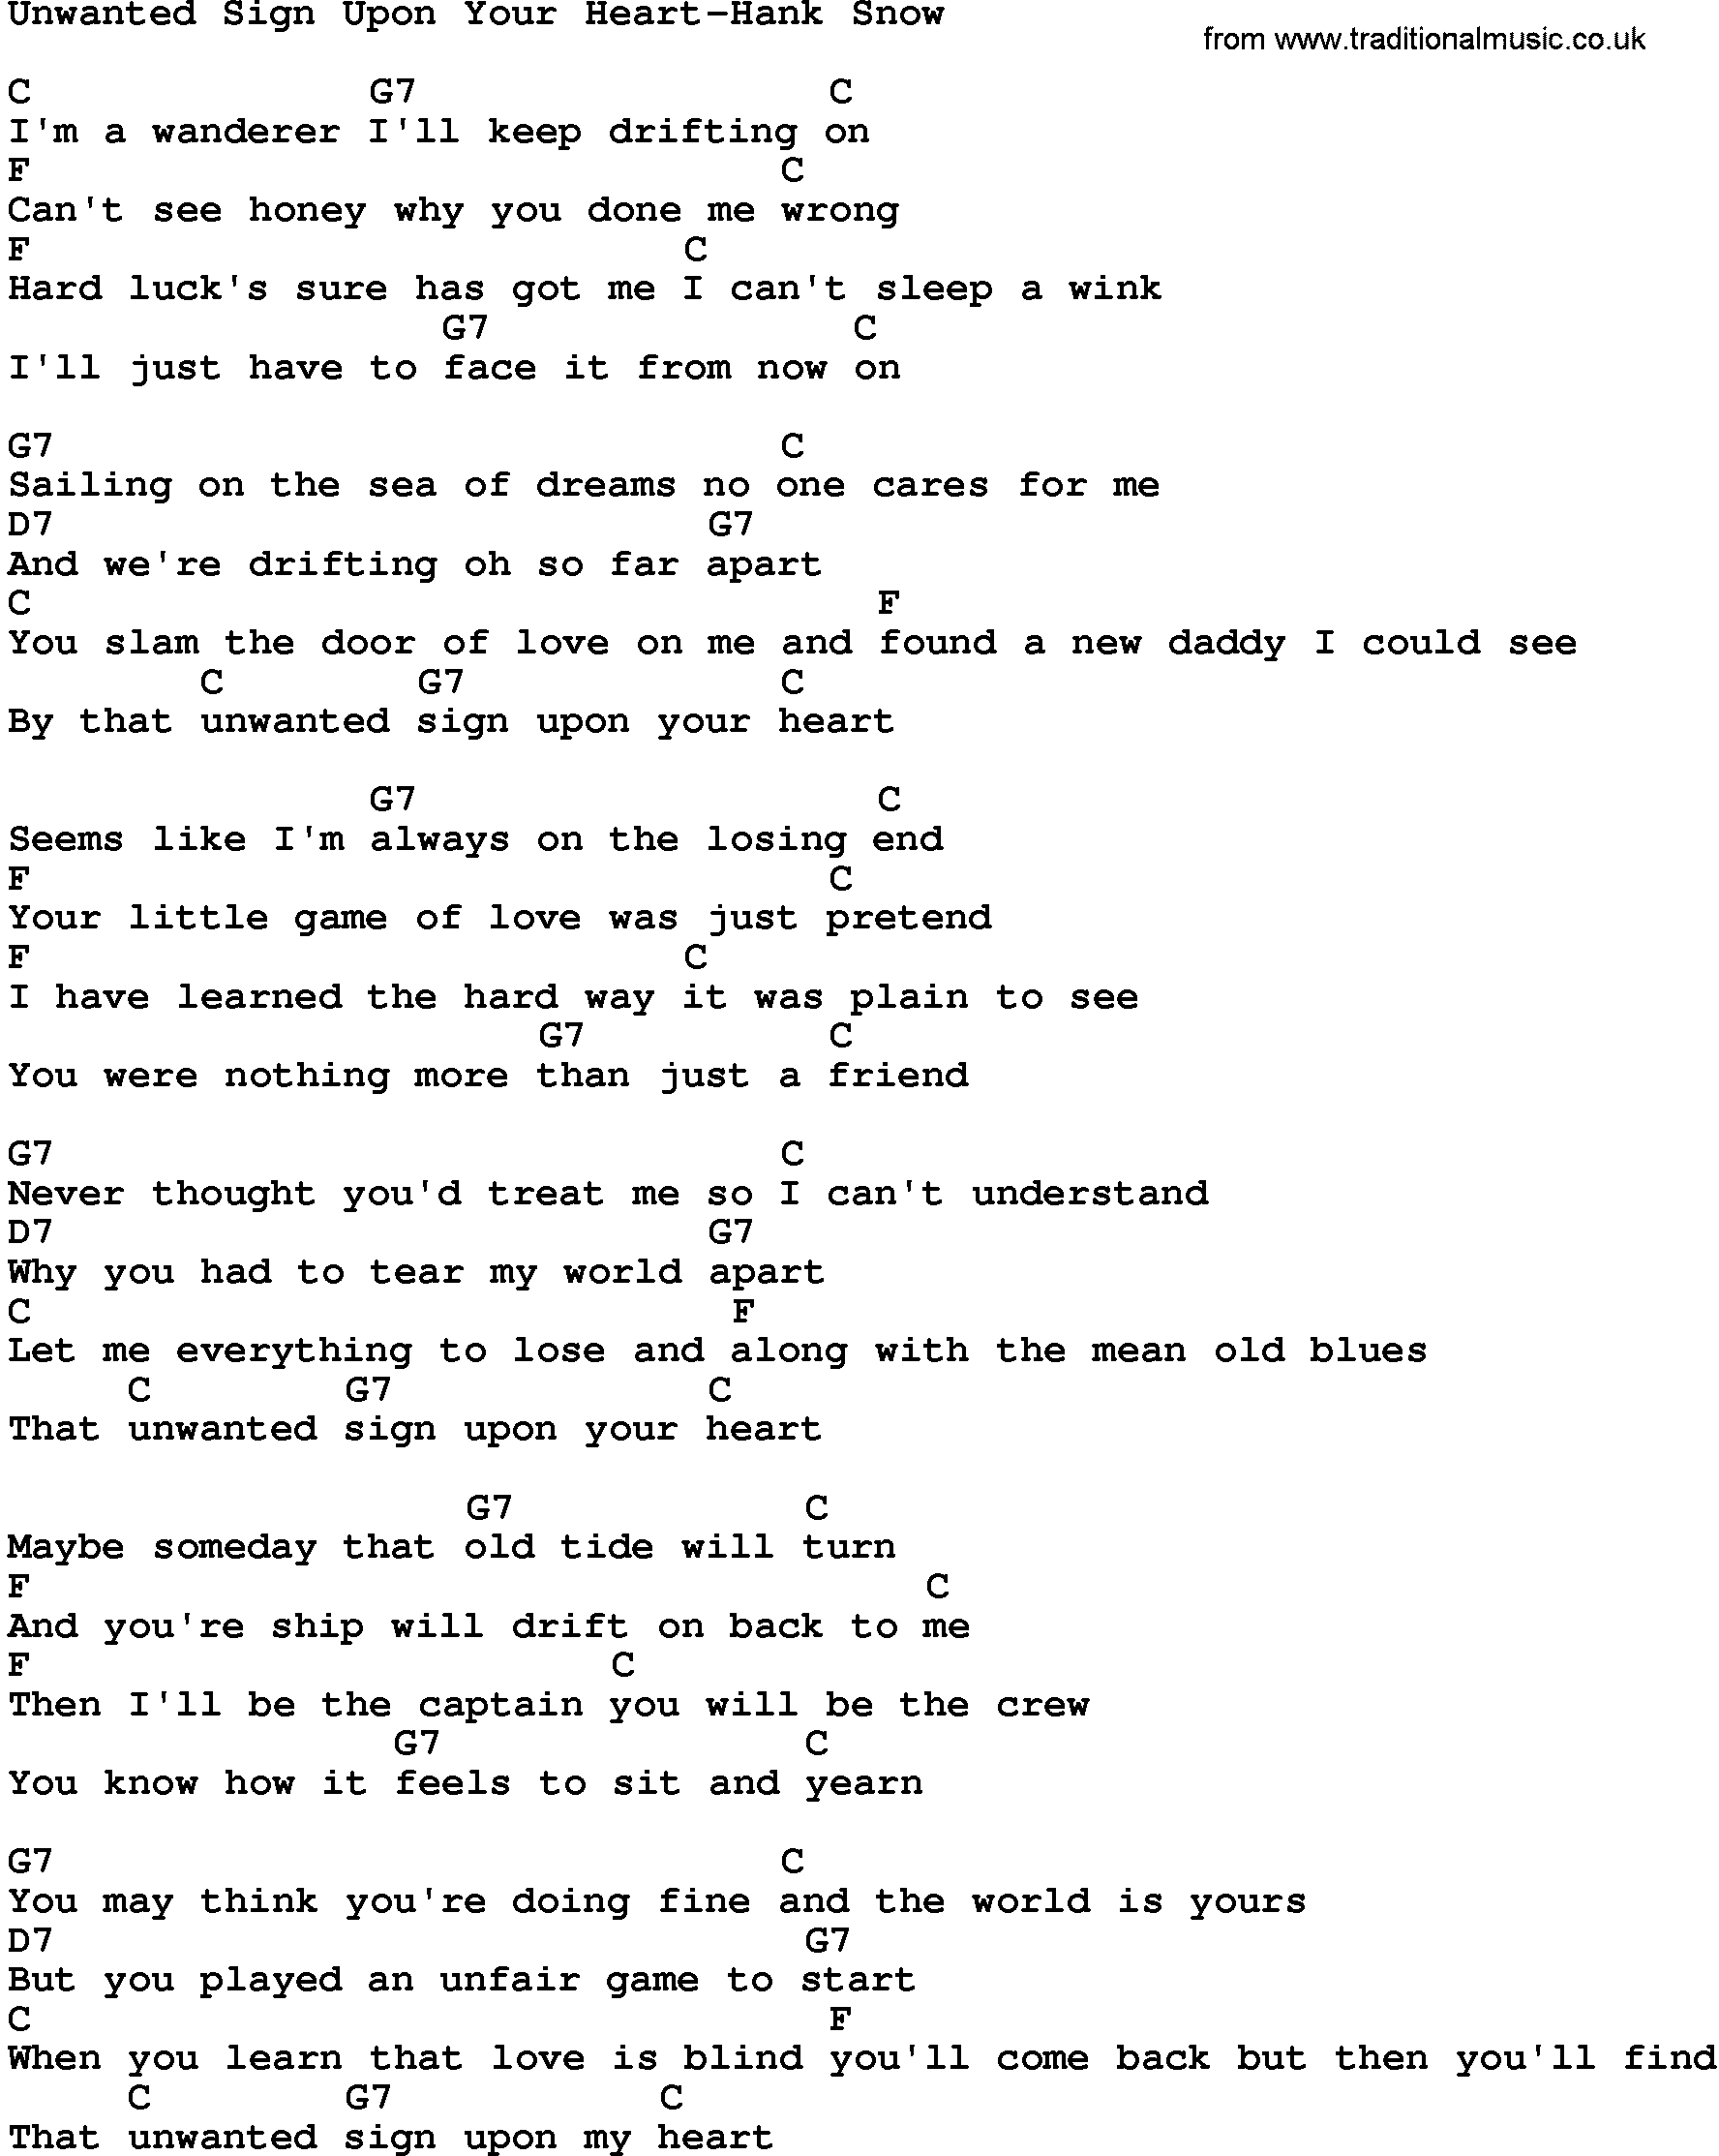 Country music song: Unwanted Sign Upon Your Heart-Hank Snow lyrics and chords